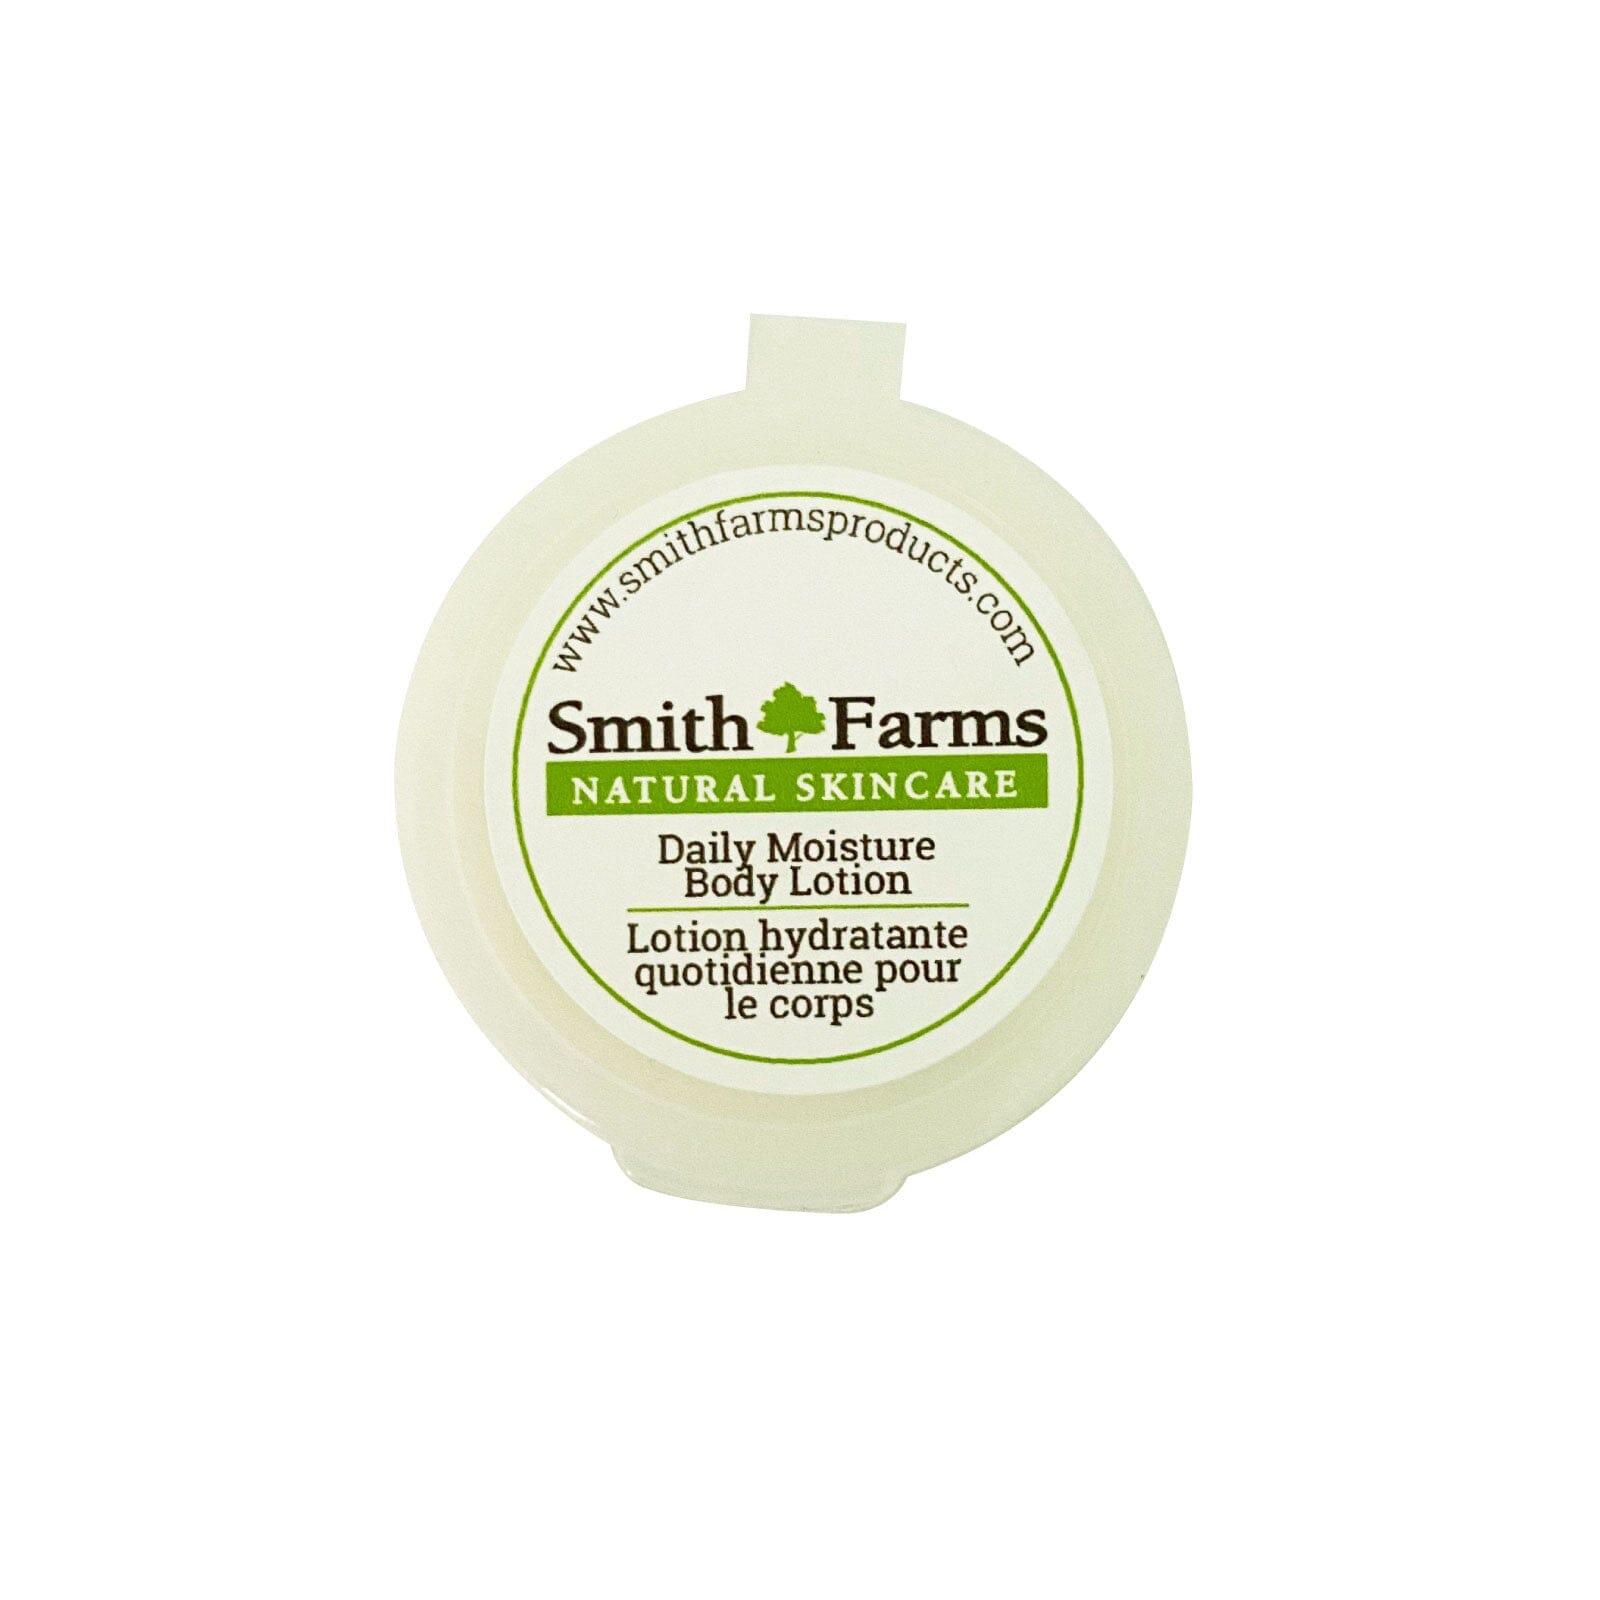 Daily Moisture Body Lotion Body Care,Our Products Smith Farms 7 ml (sample) 